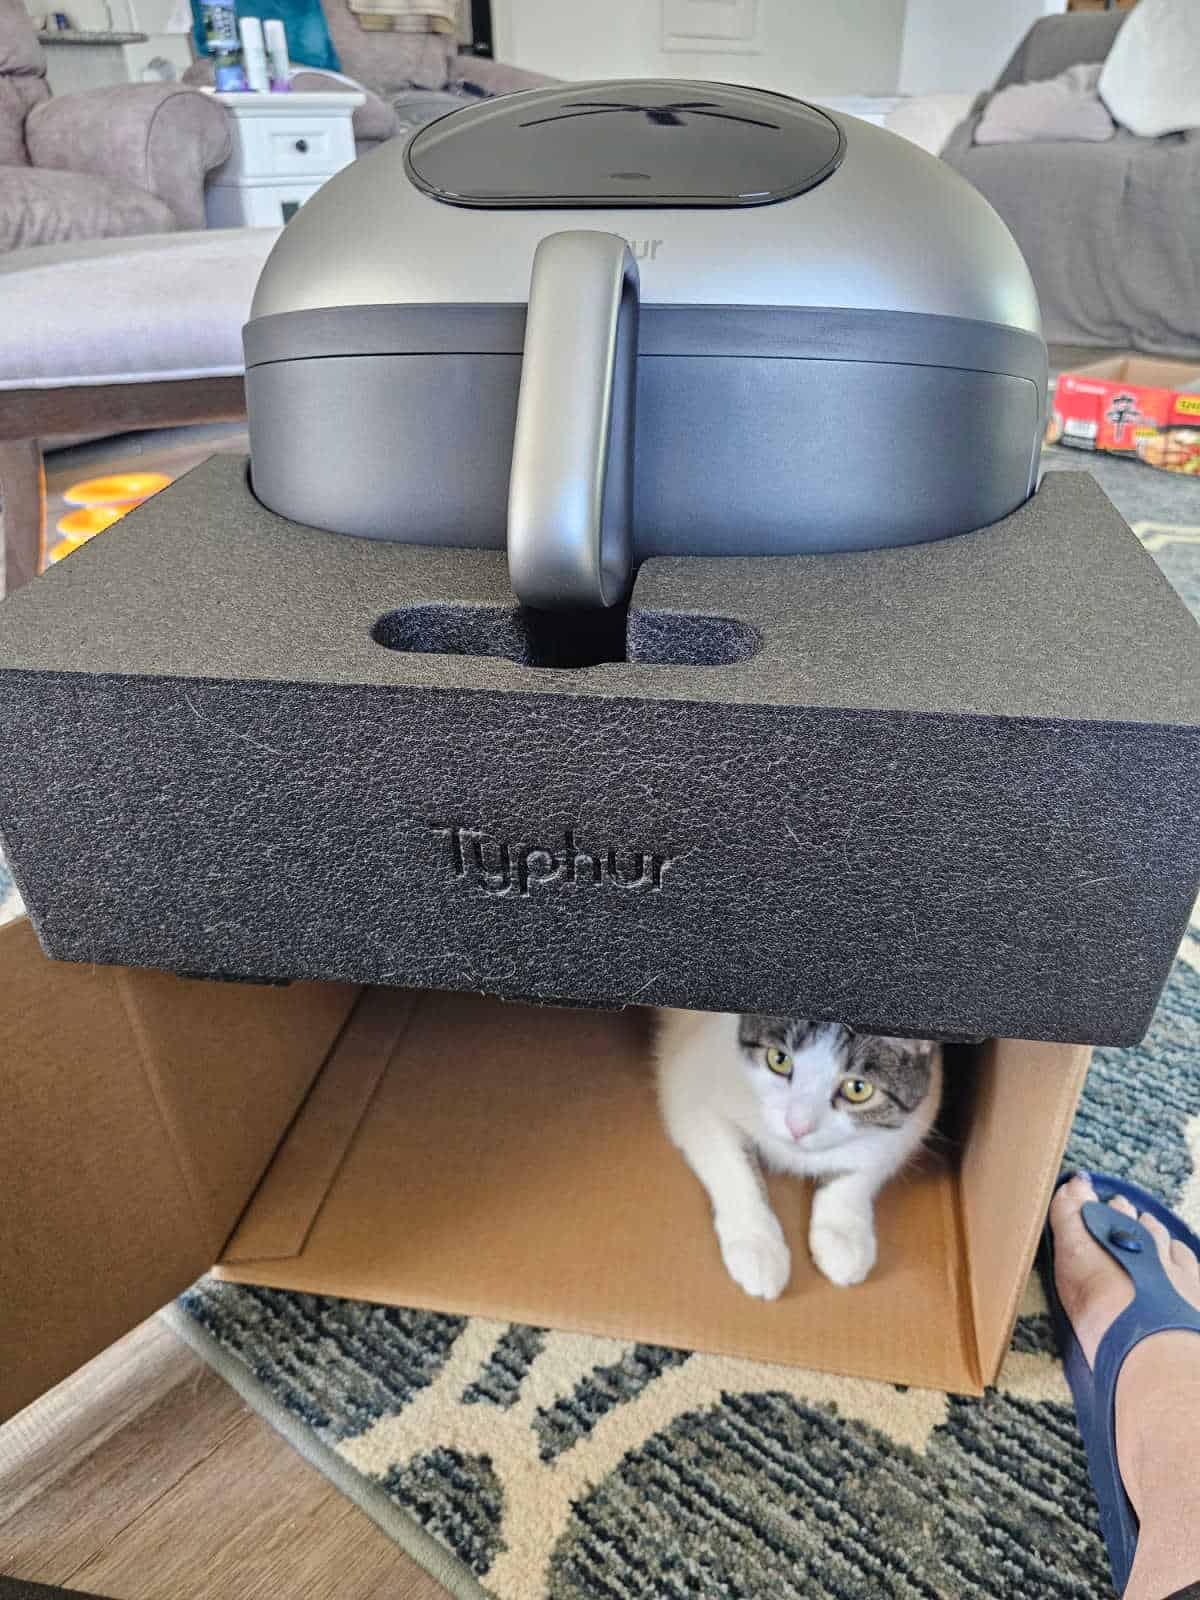 Typhur air dome sitting on top of a box with a kitten inside of it